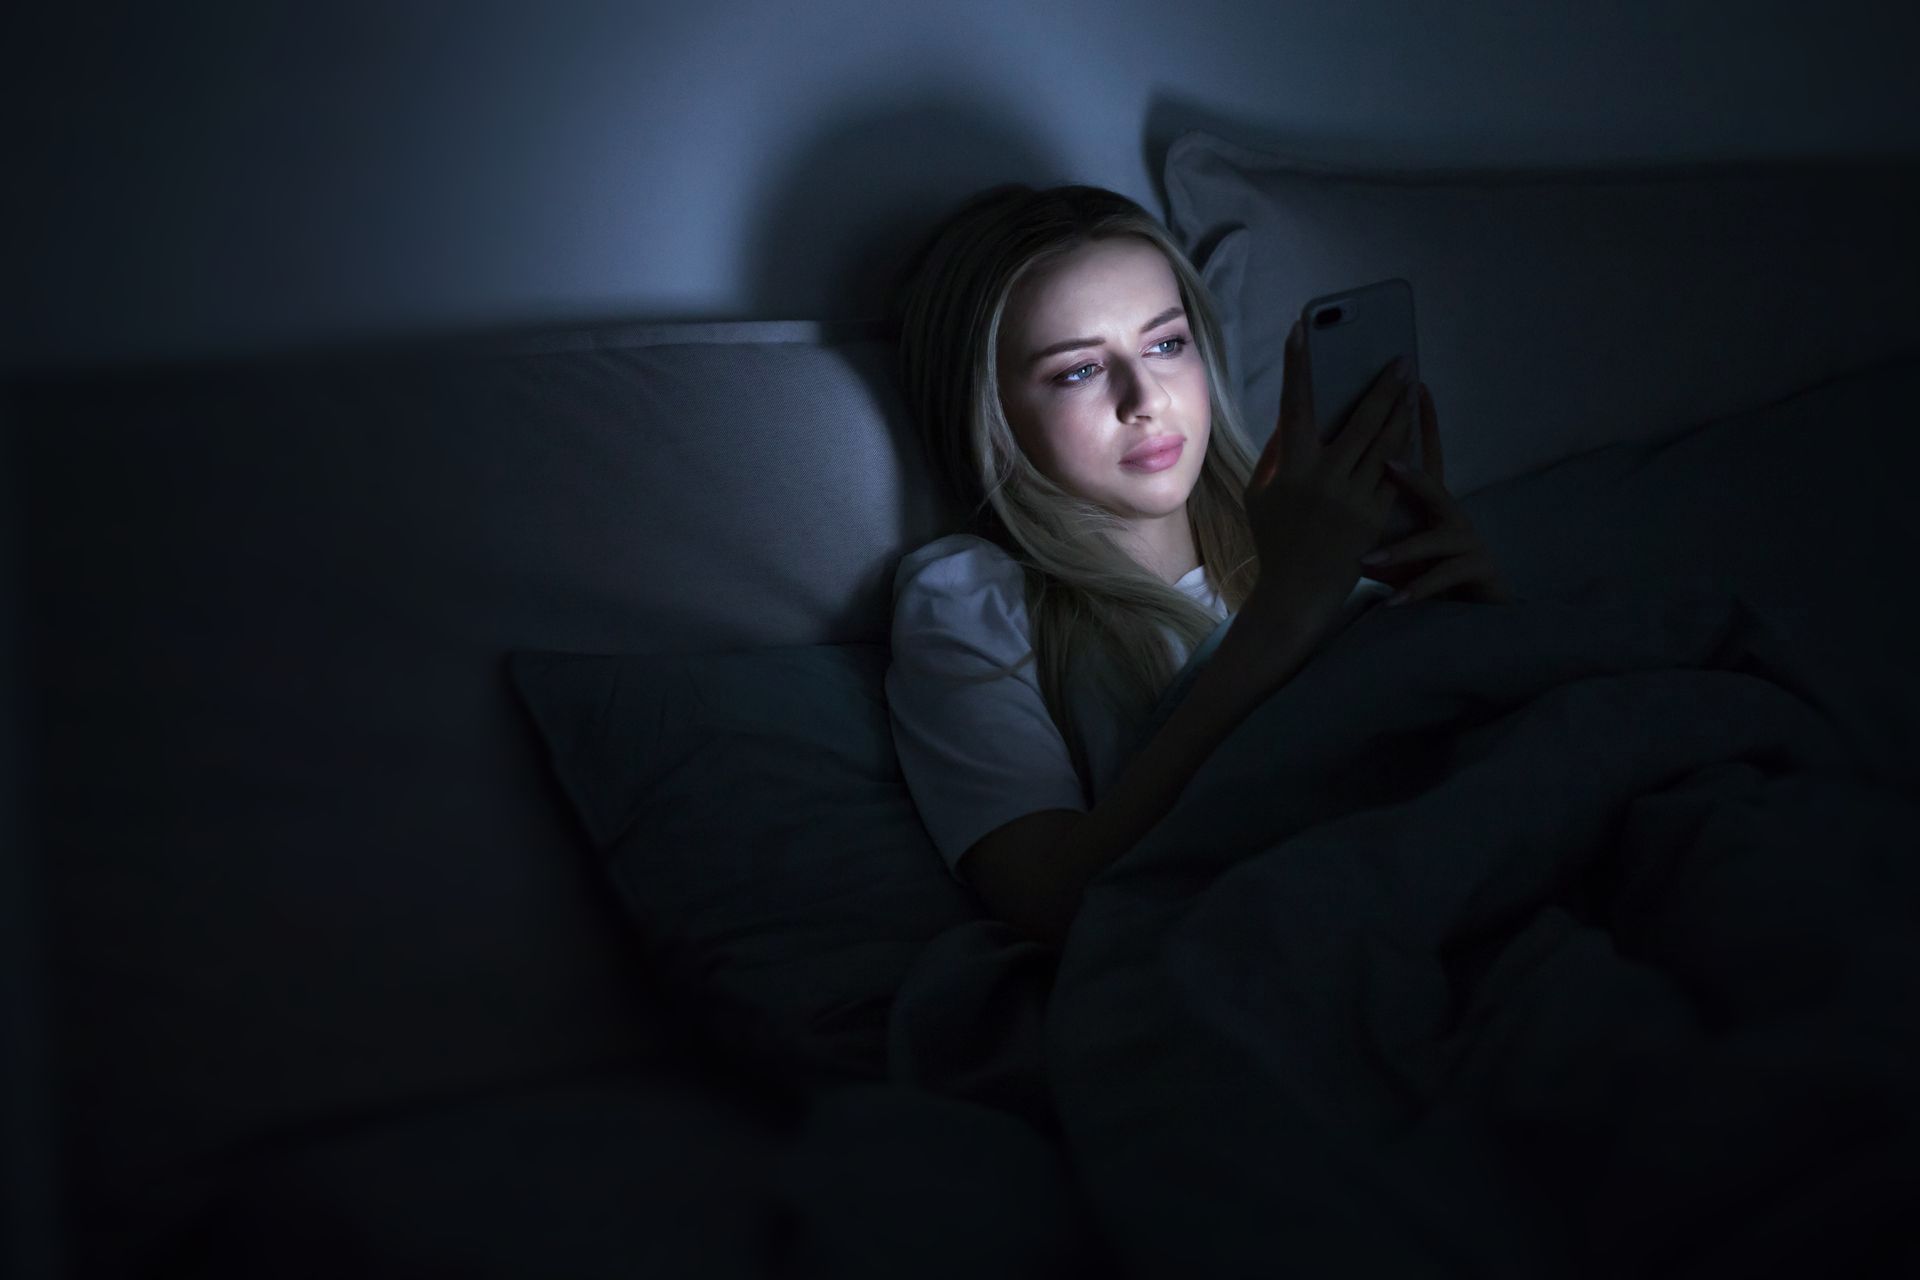 Woman alone in the dark looking at social media